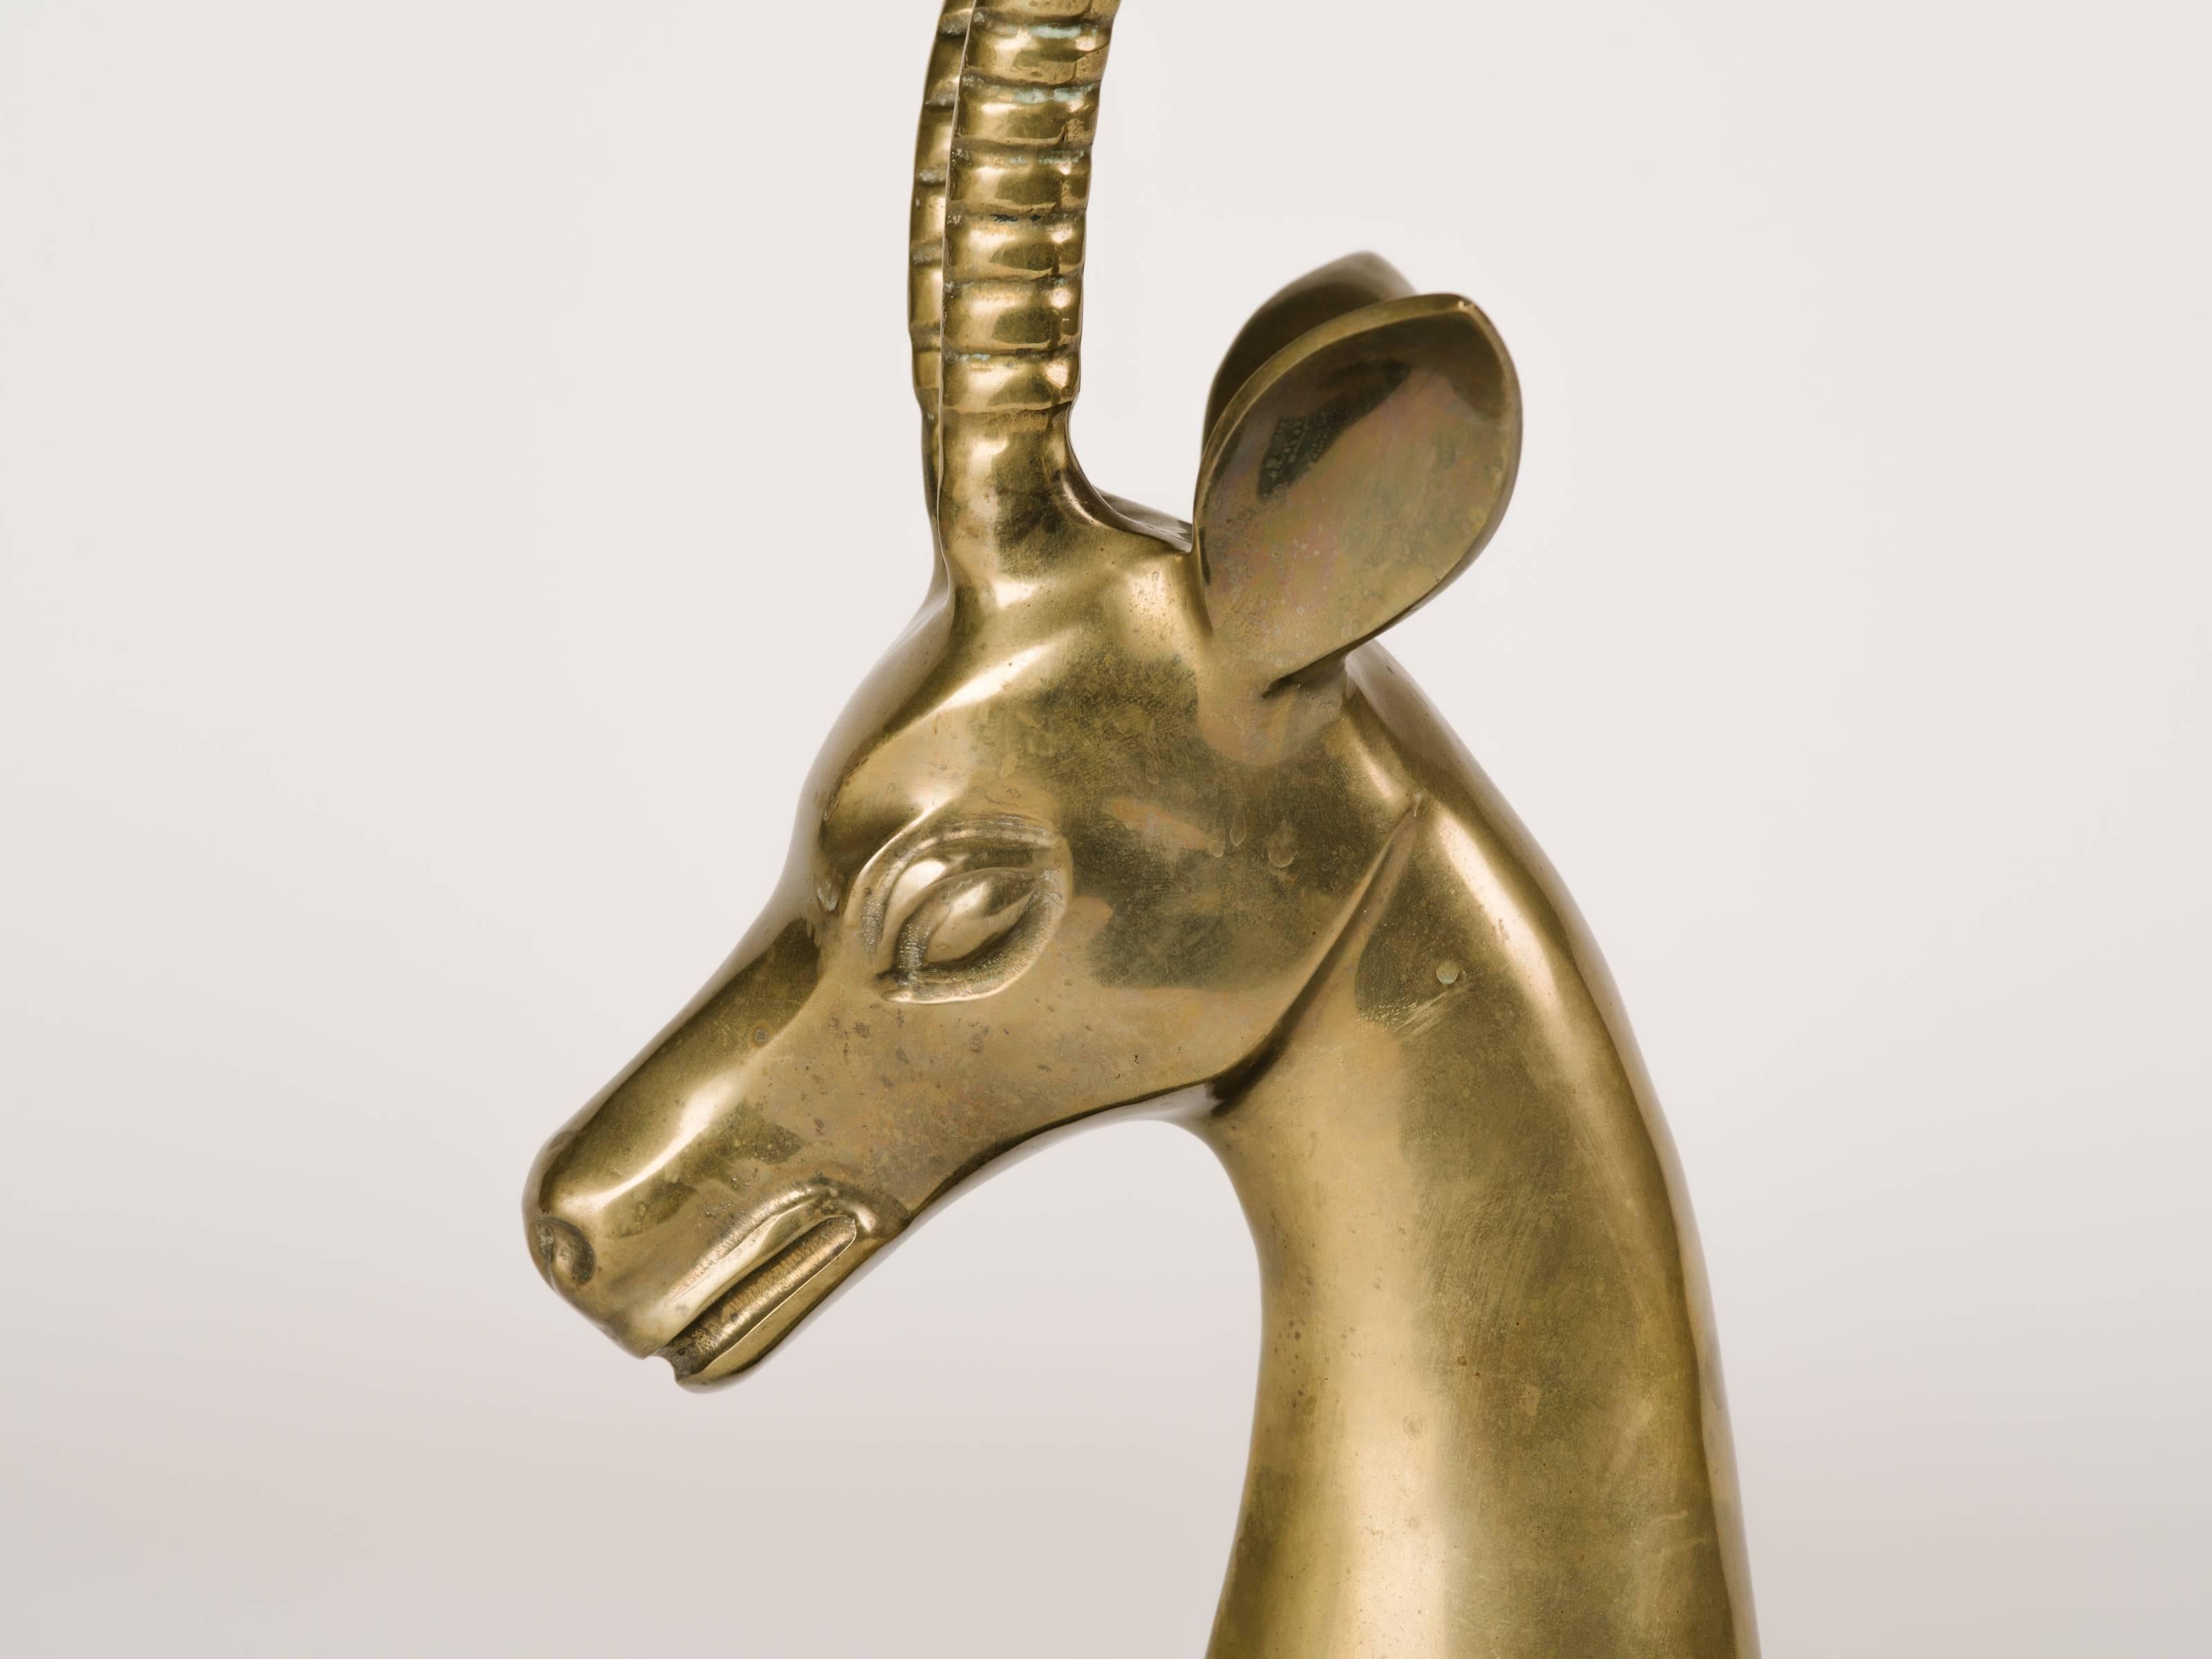 Hand-Crafted Mid-Century Modern Brass Gazelle Sculpture with Exotic Marble Base, c. 1970's For Sale